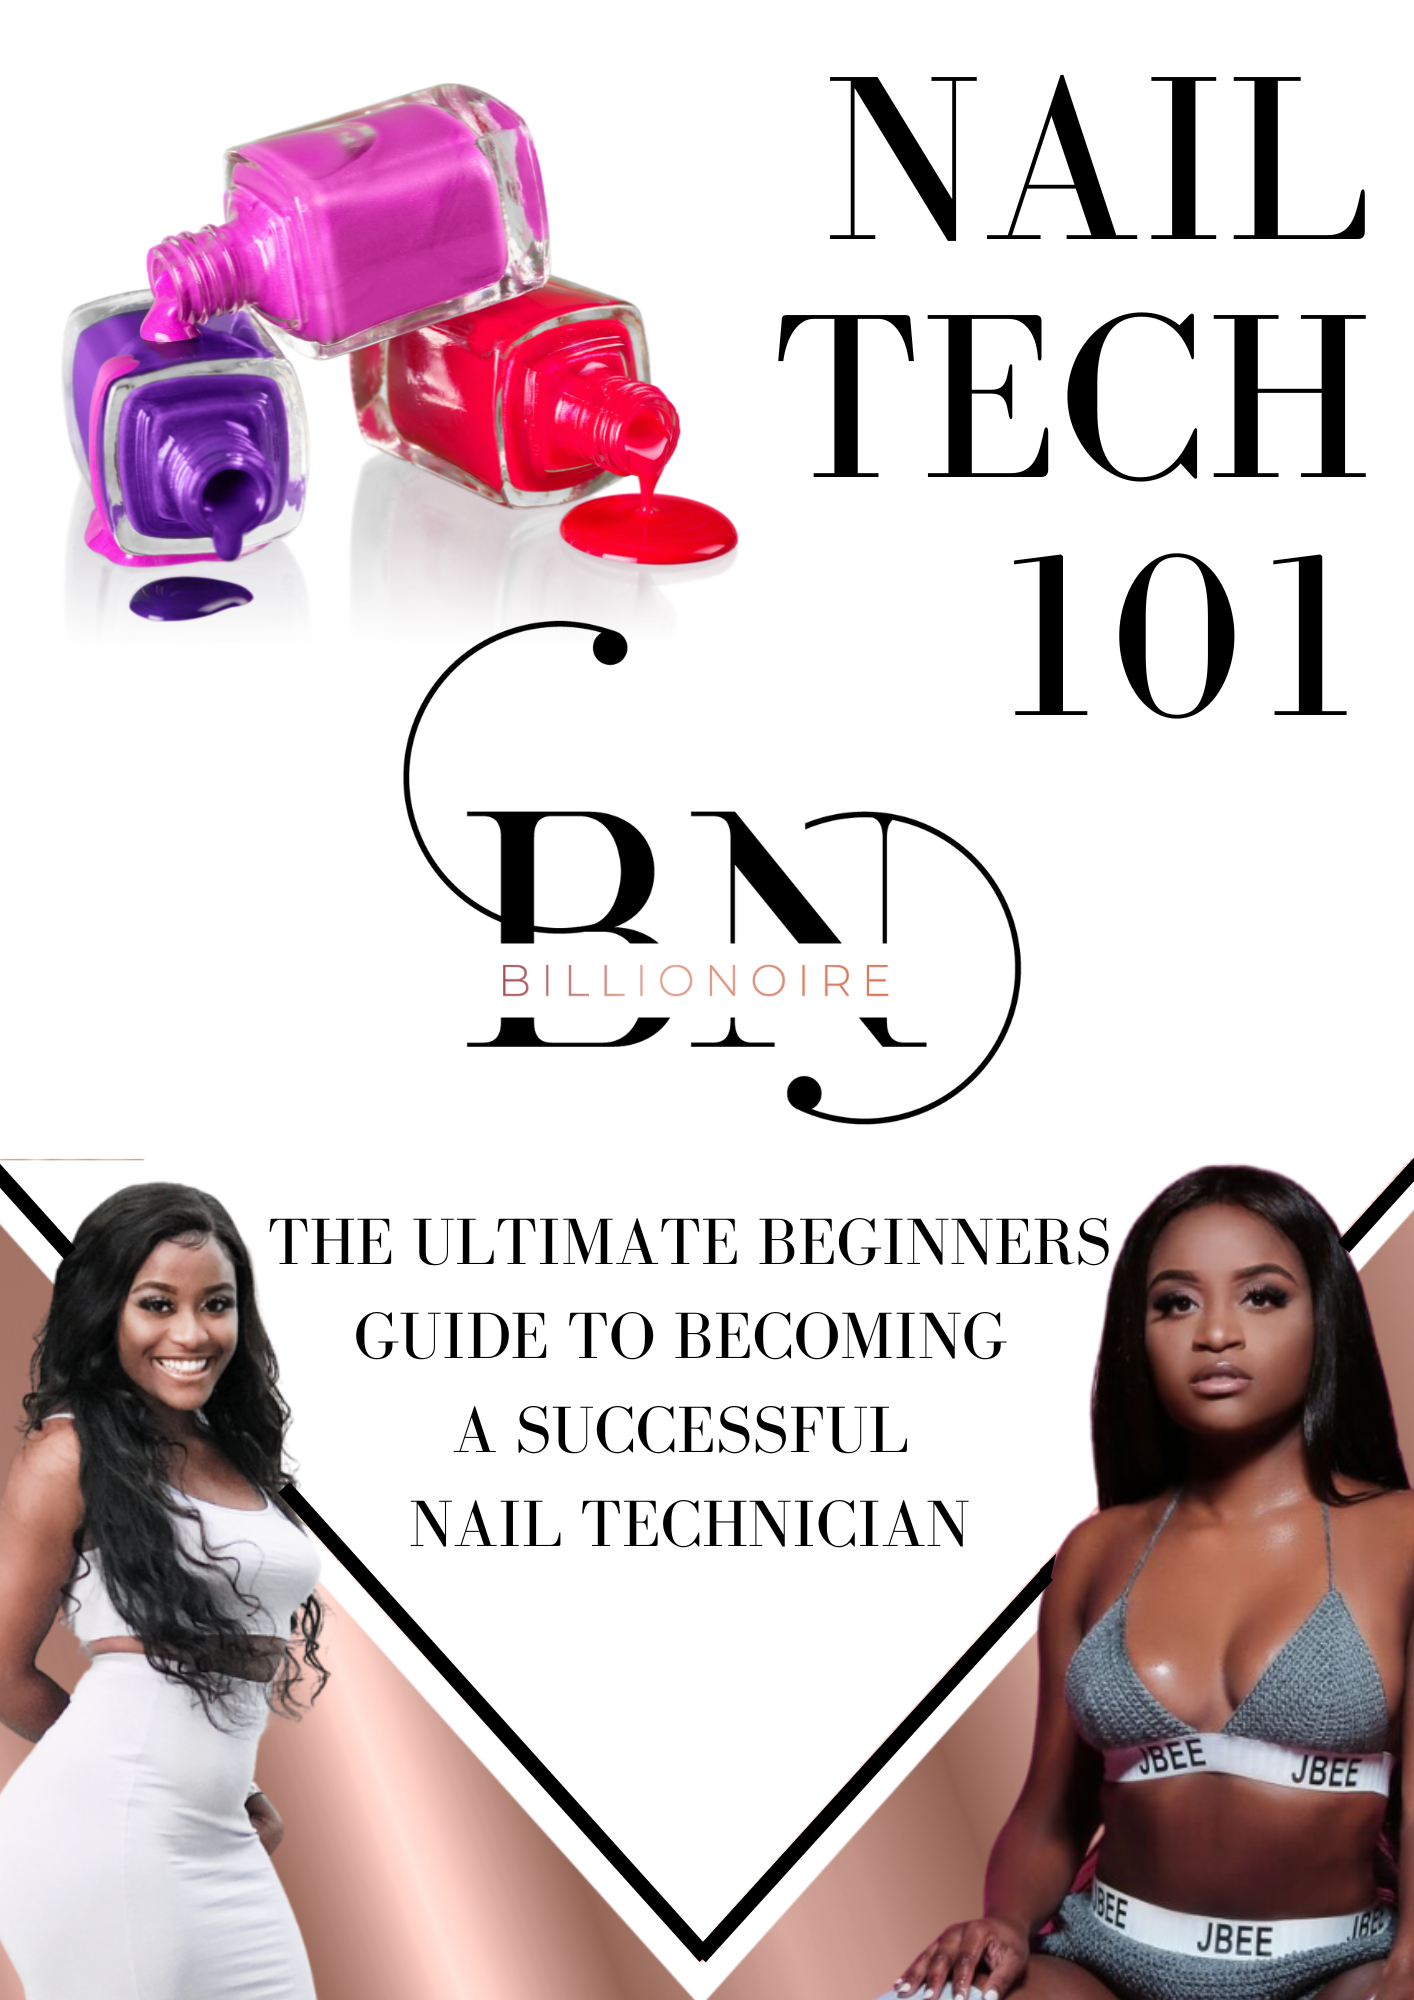 NAIL TECH 101: The Ultimate Beginner's Guide to Becoming a Successful Nail Technician